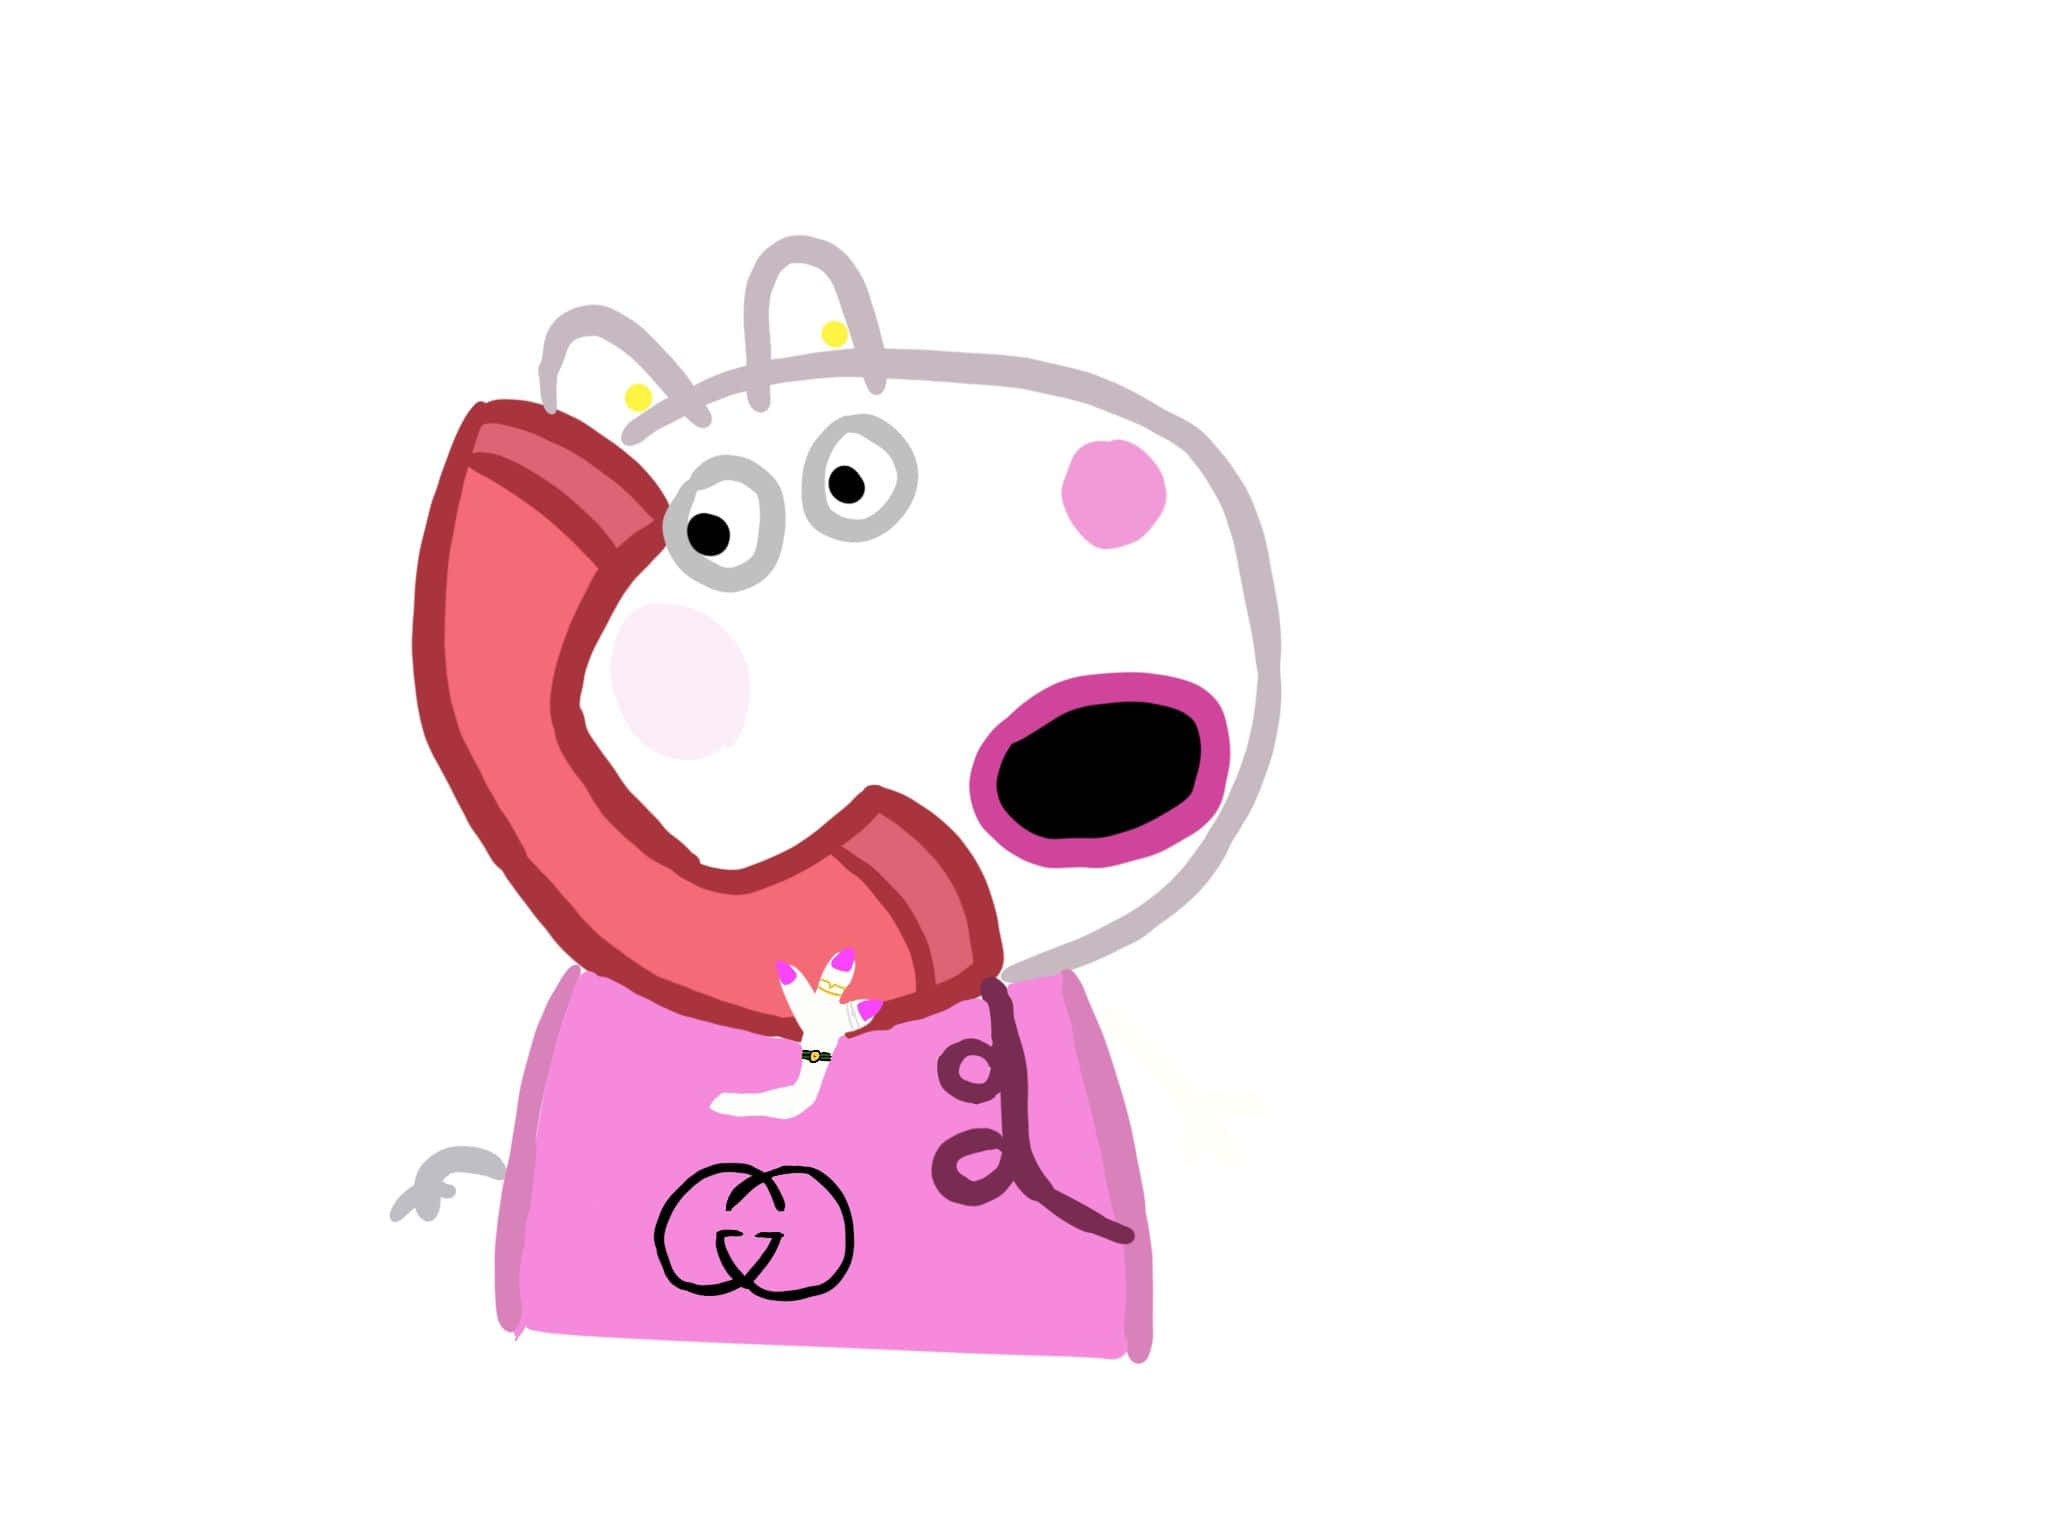 Suzy Sheep – A Sweet, Silly Character Wallpaper